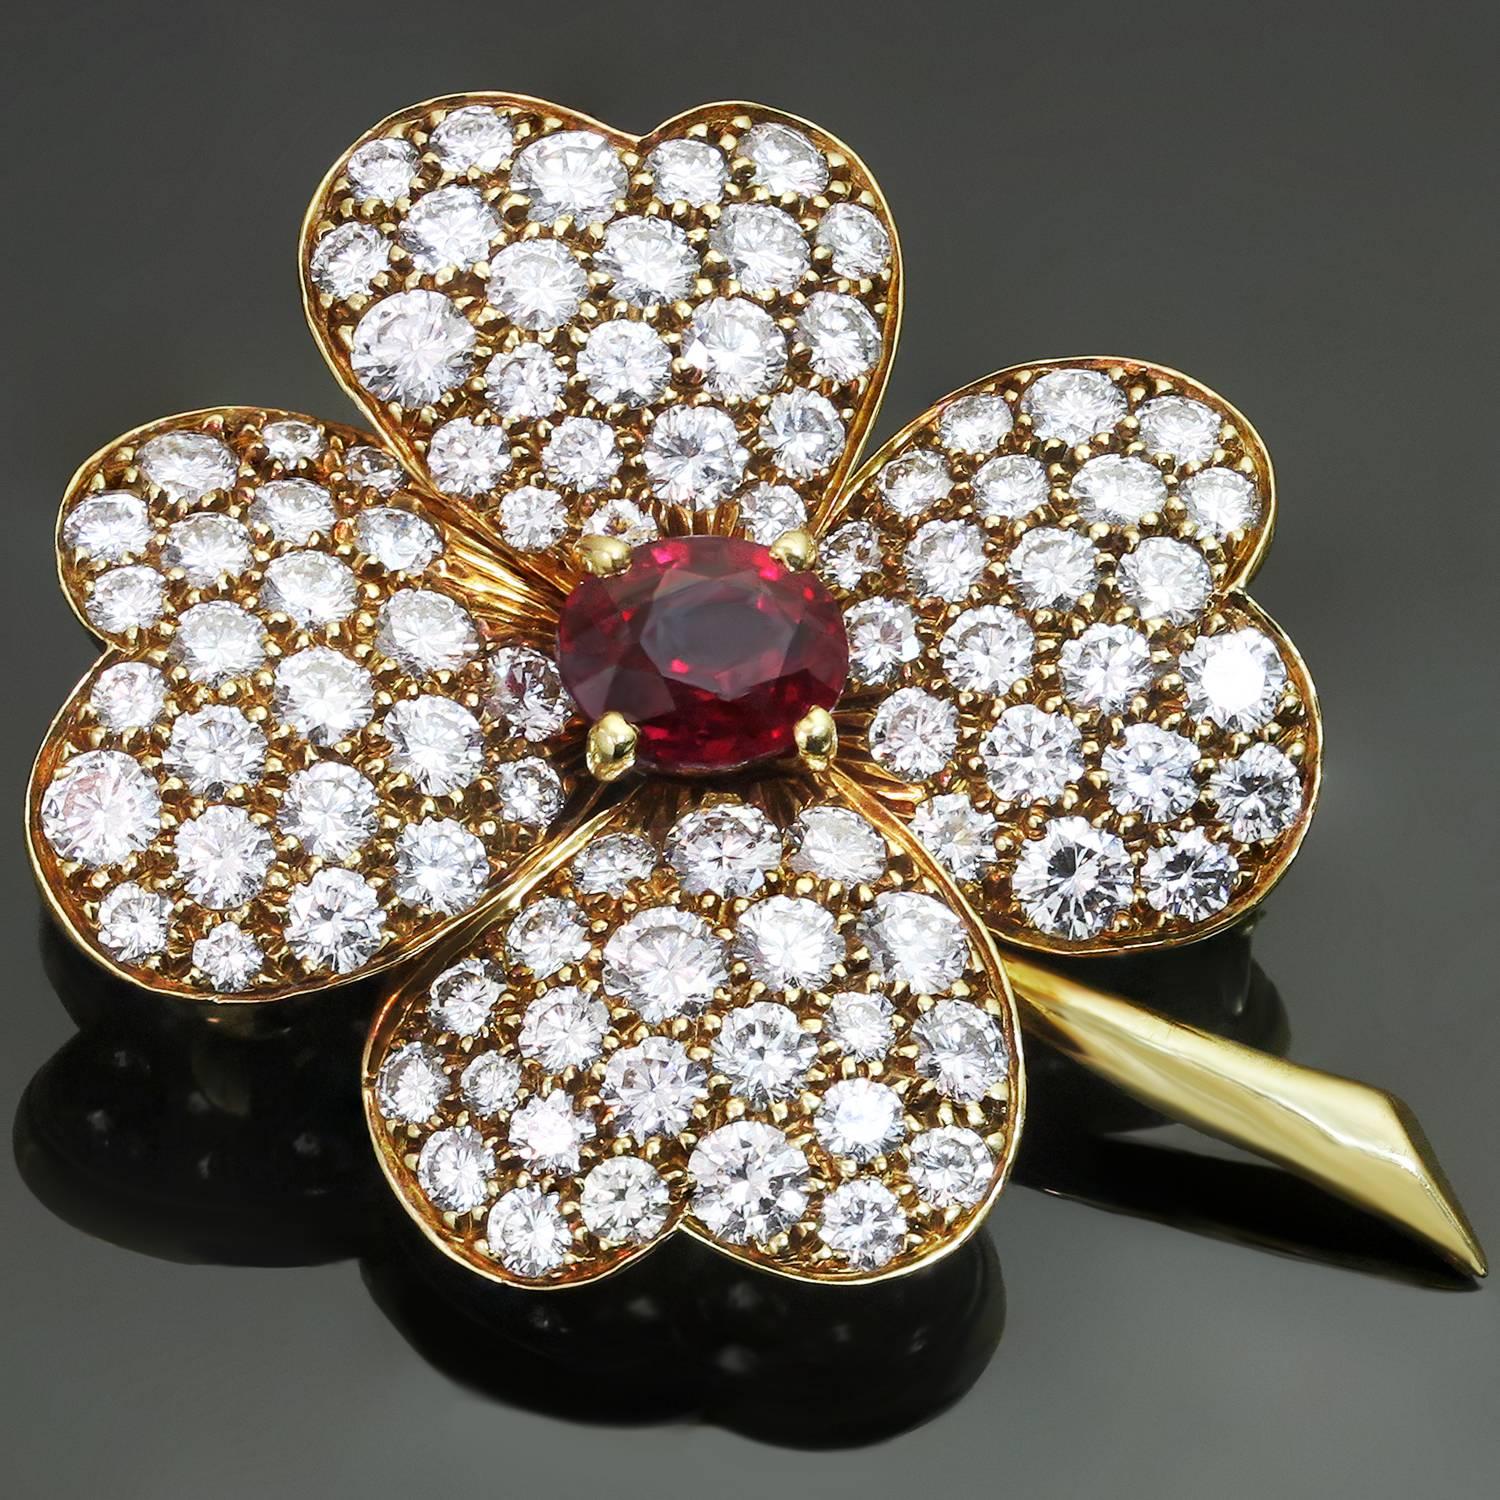 This iconic flower-shaped brooch from the radiant Cosmos collection by Van Cleef & Arpels  is crafted in 18k yellow gold and prong-set with a stunning 0.65 carat ruby in the center surrounded with four sparkling leaves pave-set with brilliant-cut